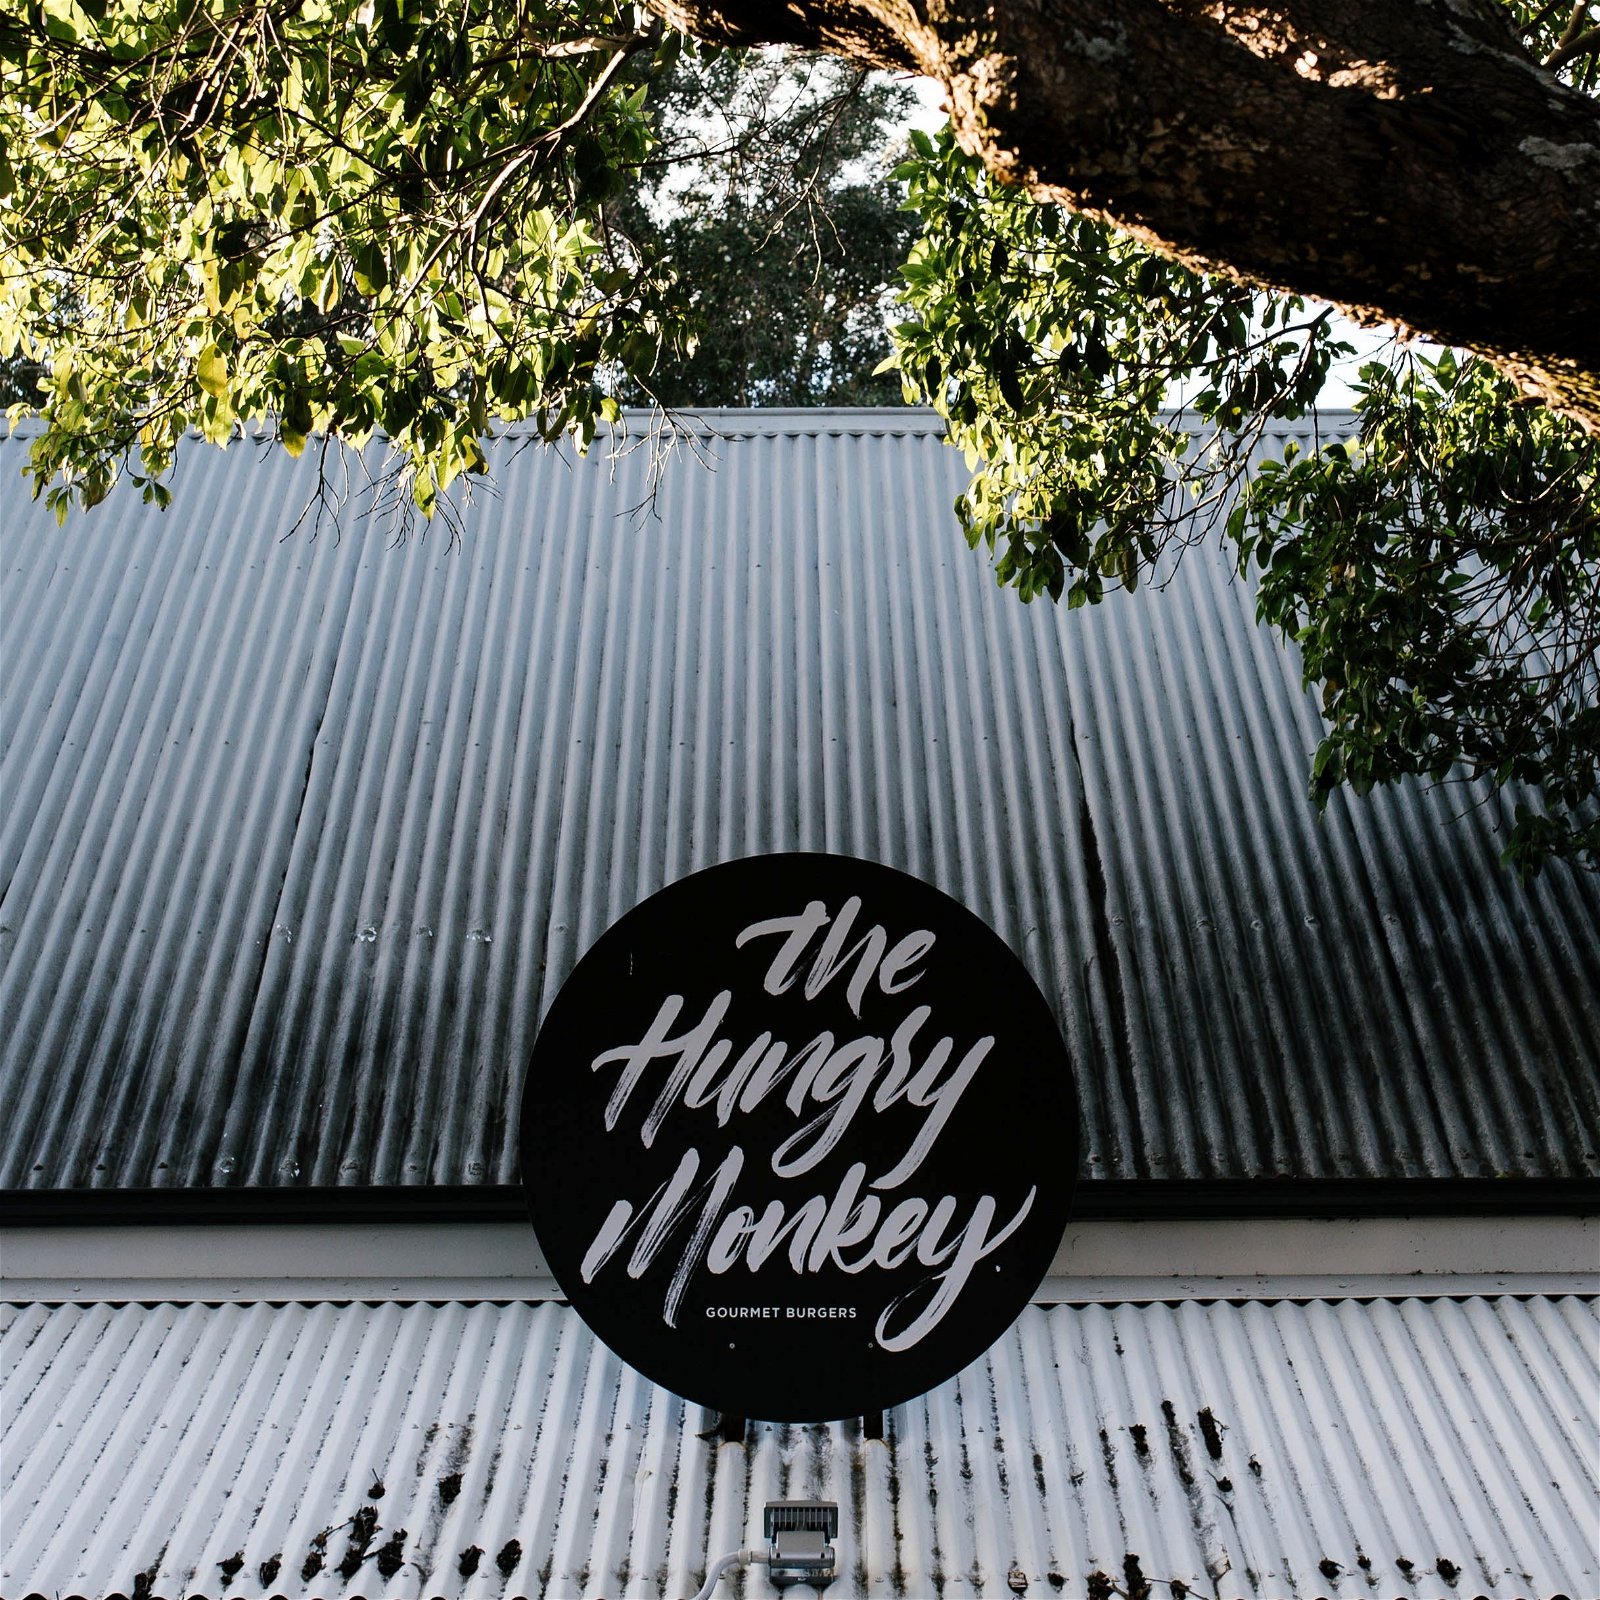 Hungry Monkey - Great Ocean Road Tourism